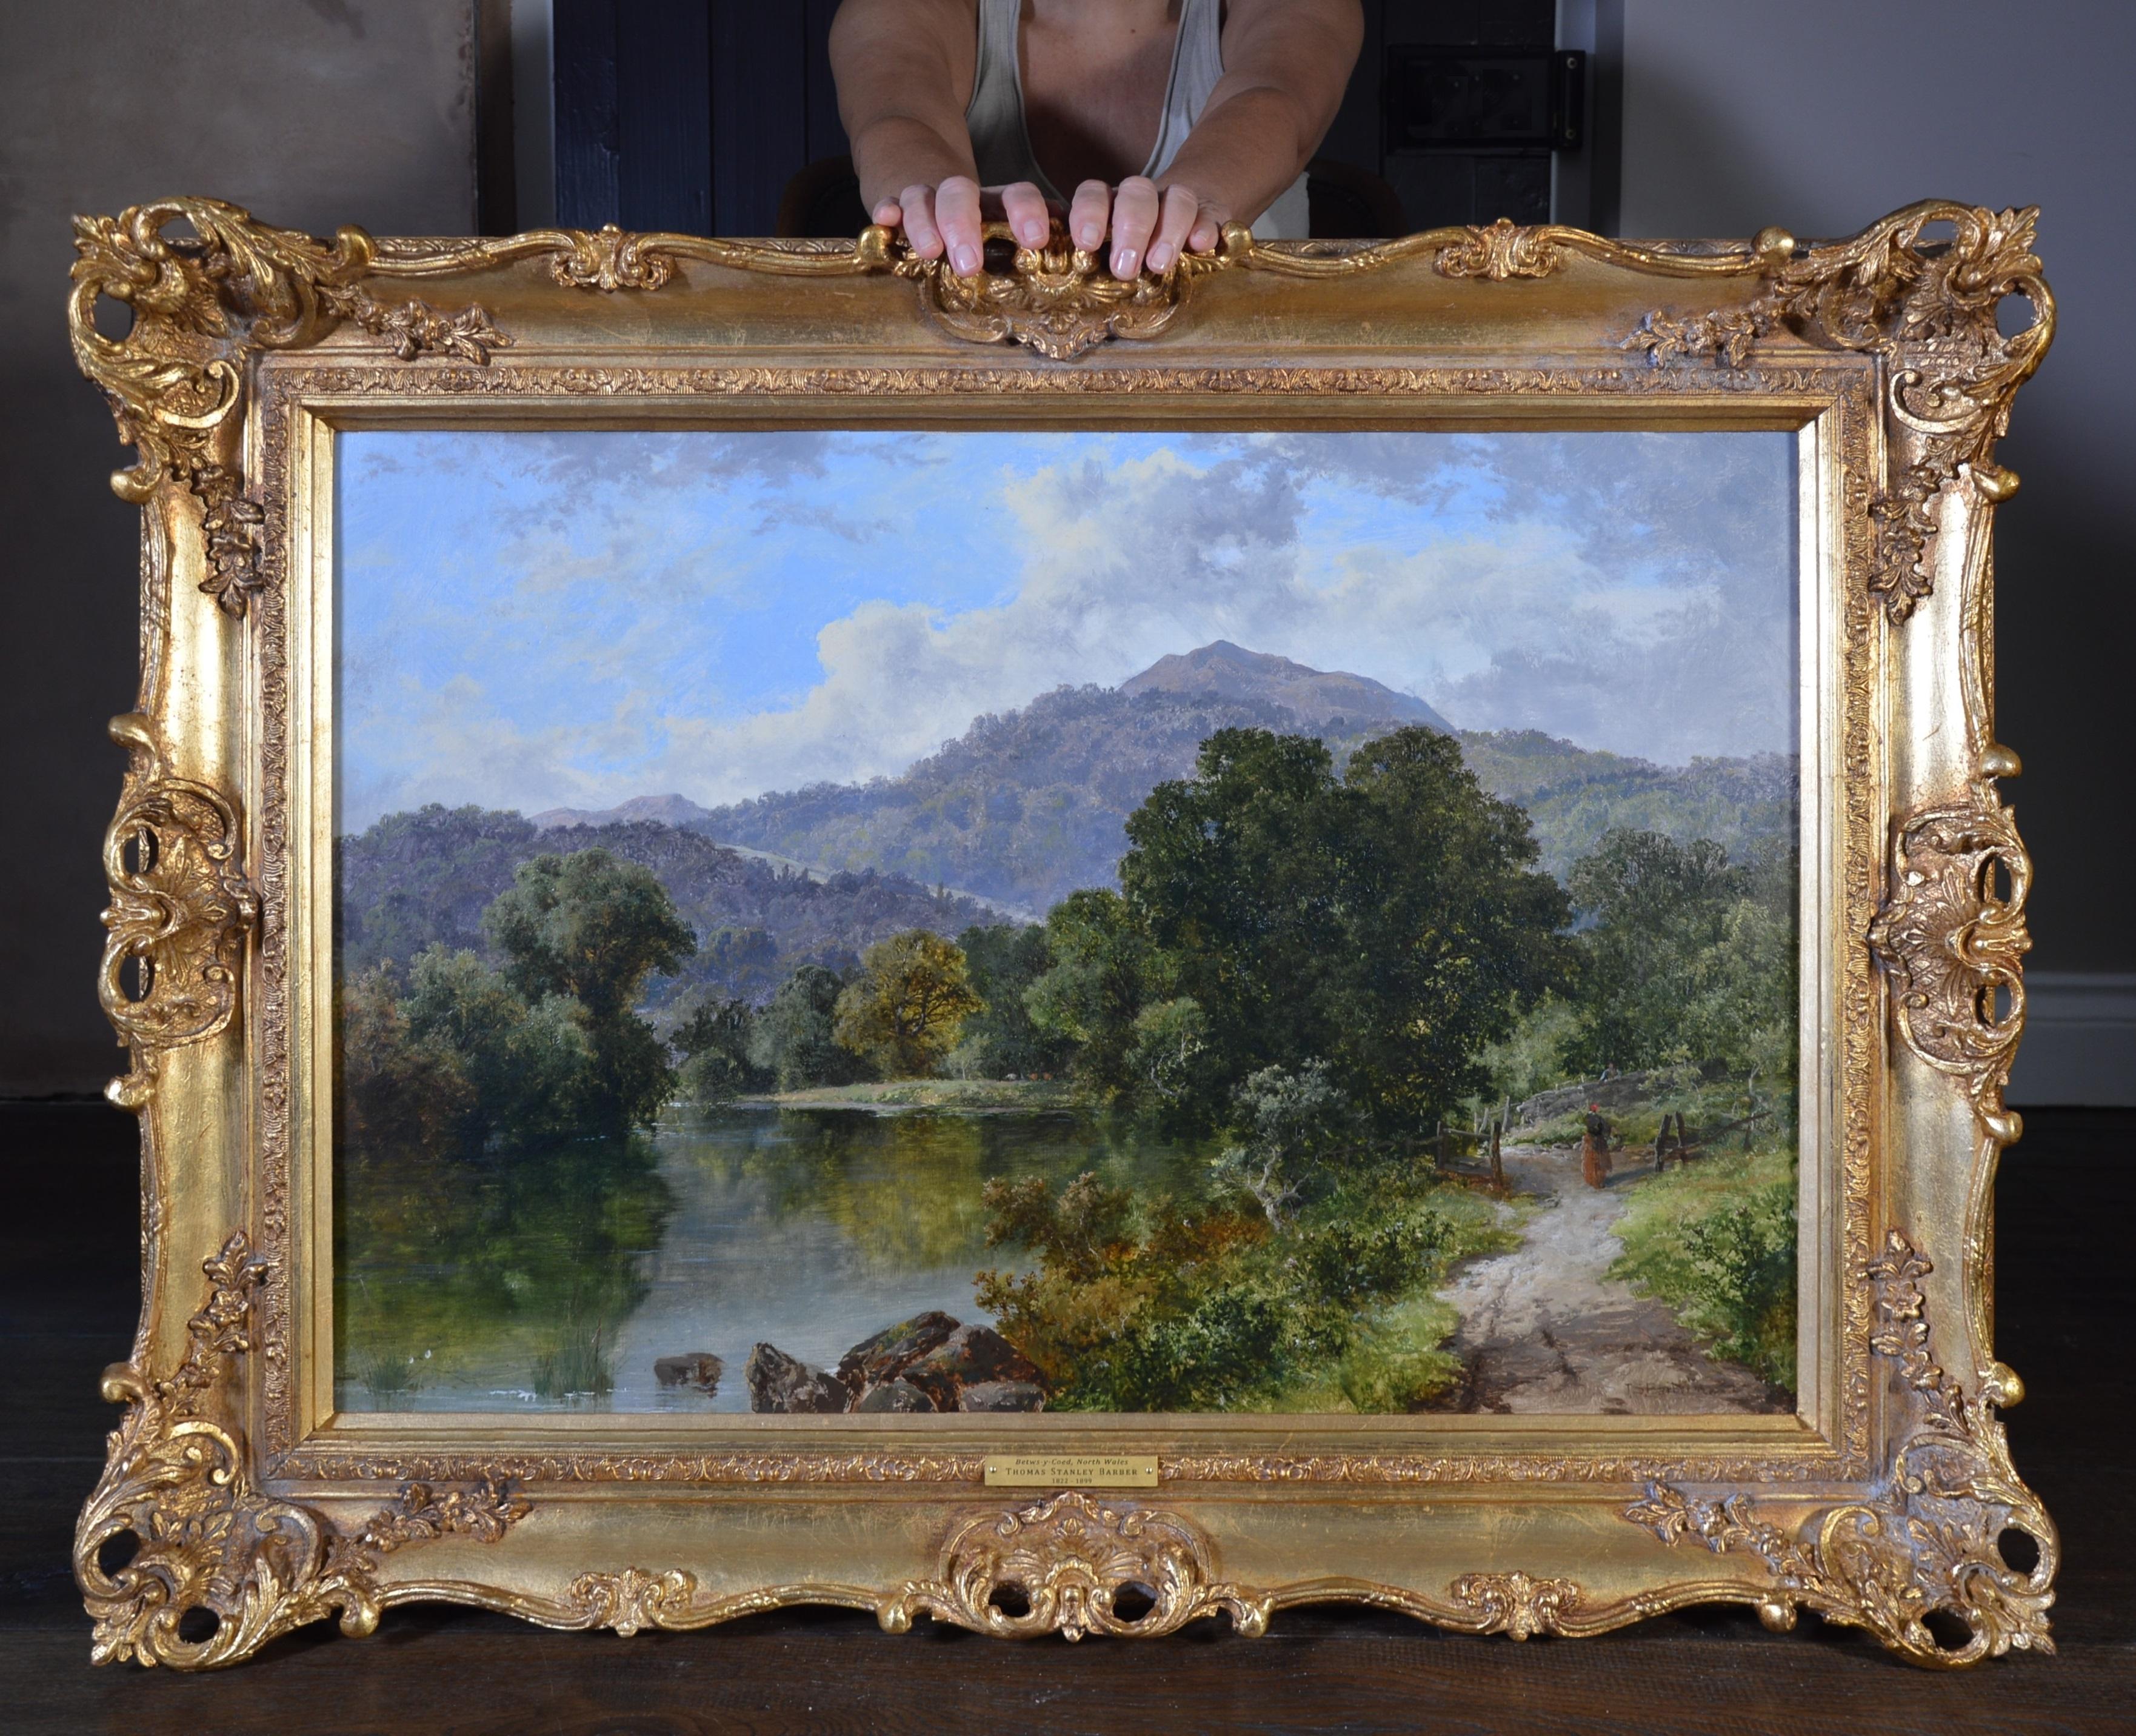 Thomas Stanley Barber Figurative Painting - Betws-y-Coed, North Wales - Large 19th Century Welsh Landscape Oil Painting 